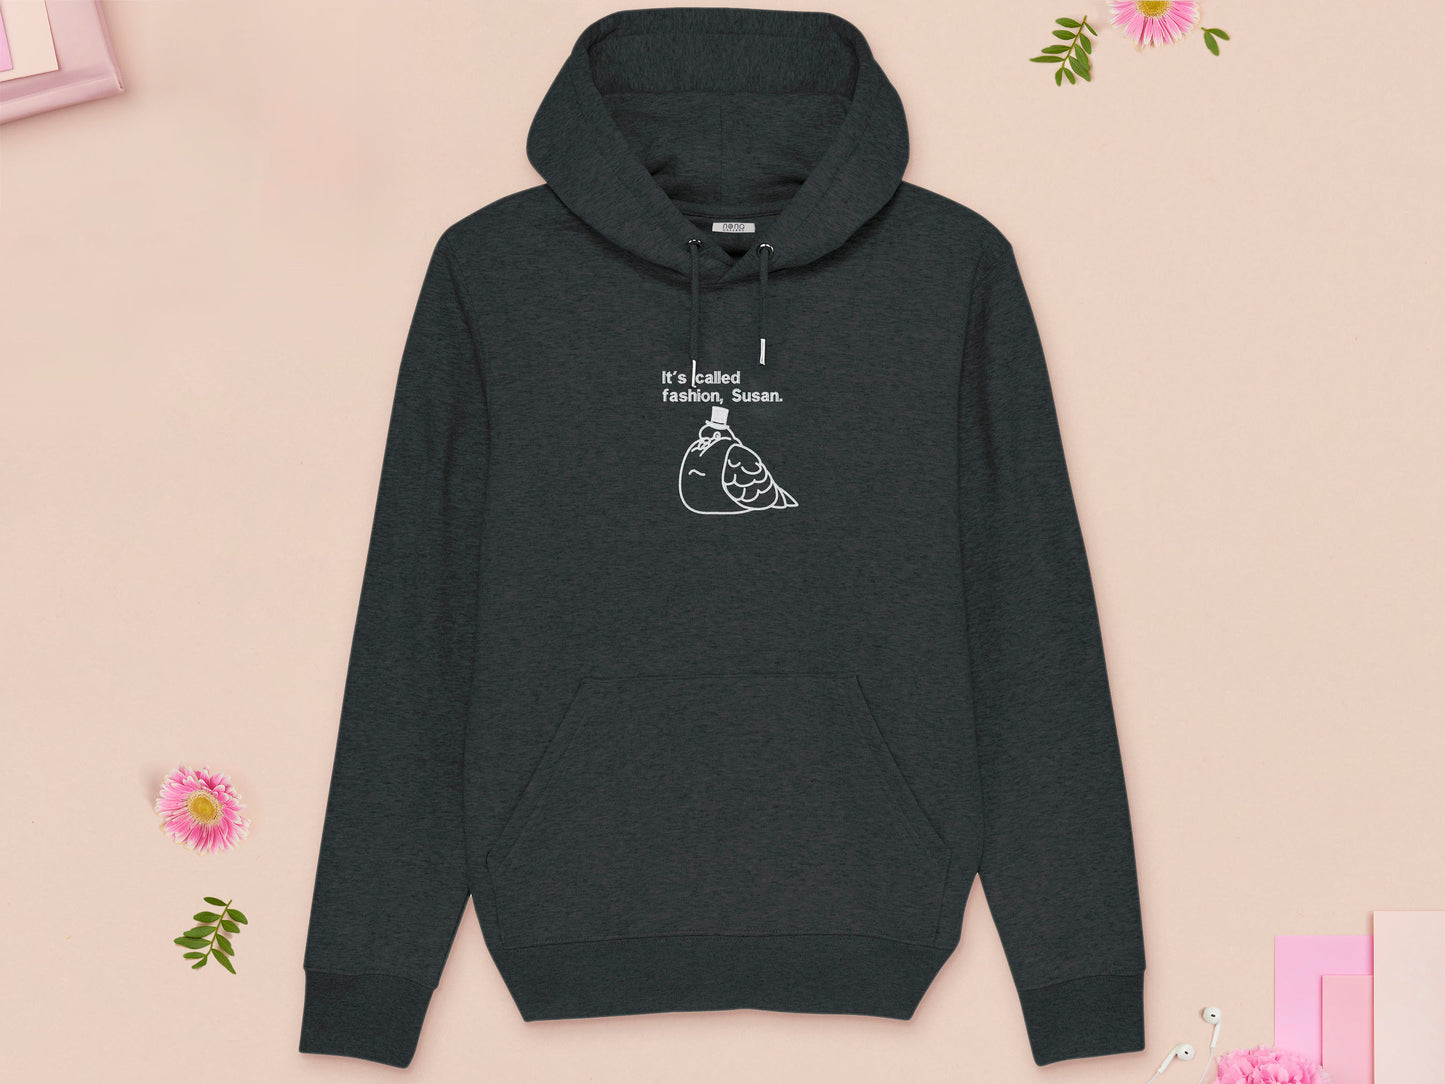 A grey long sleeve fleece hoodie, with an embroidered white thread design of cute fat pigeon wearing a top hat with text underneath reading It's Called Fashion, Susan.